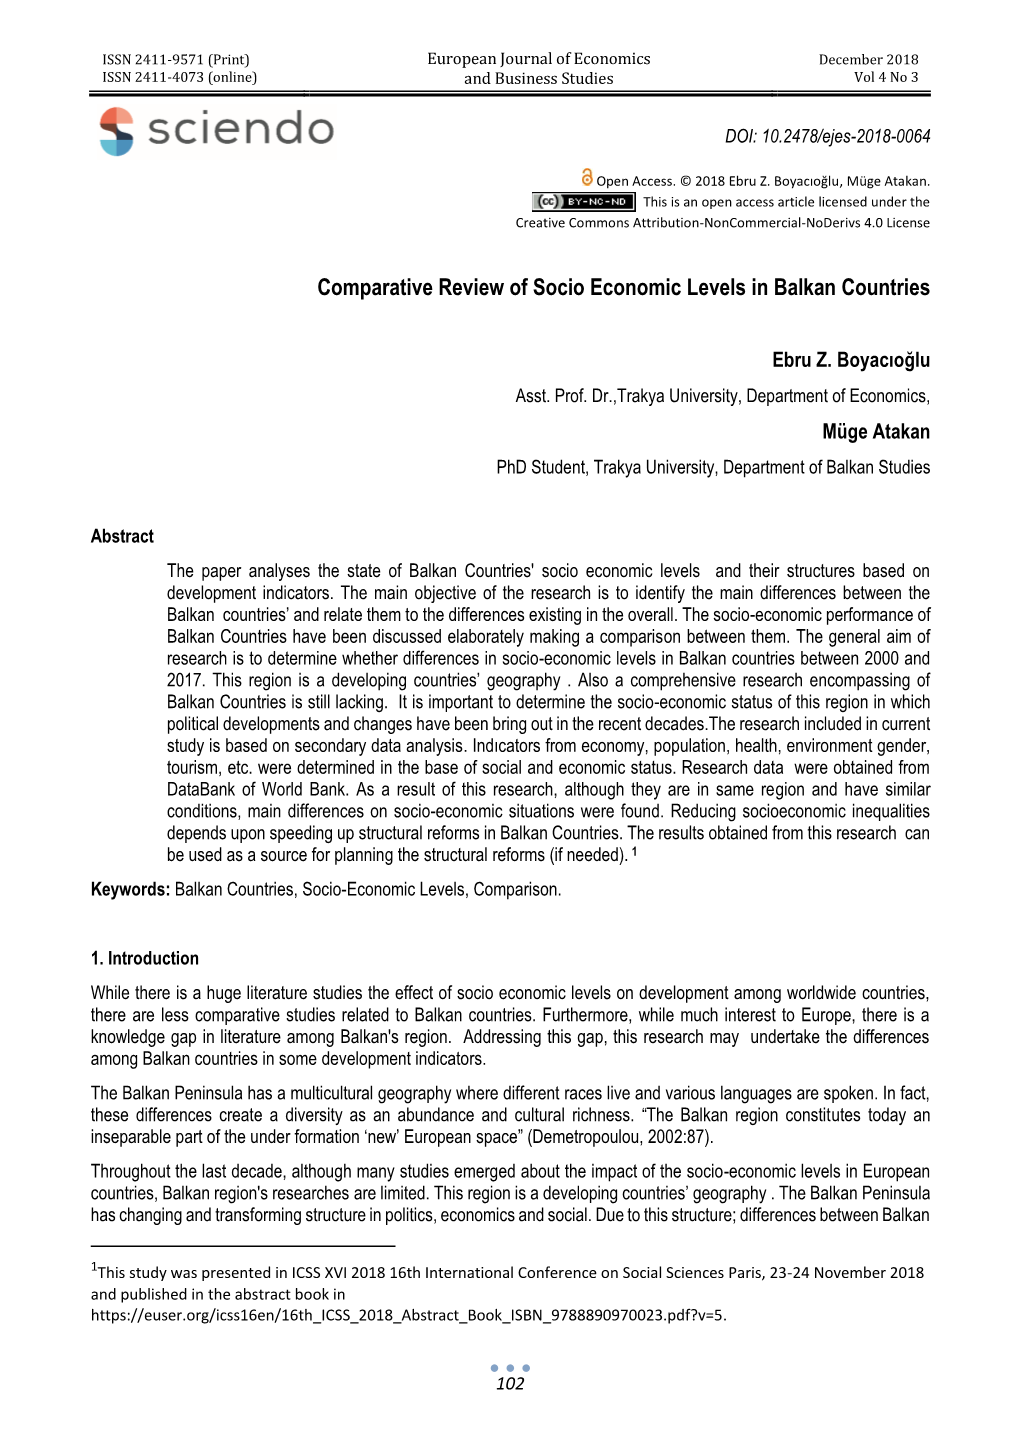 Comparative Review of Socio Economic Levels in Balkan Countries